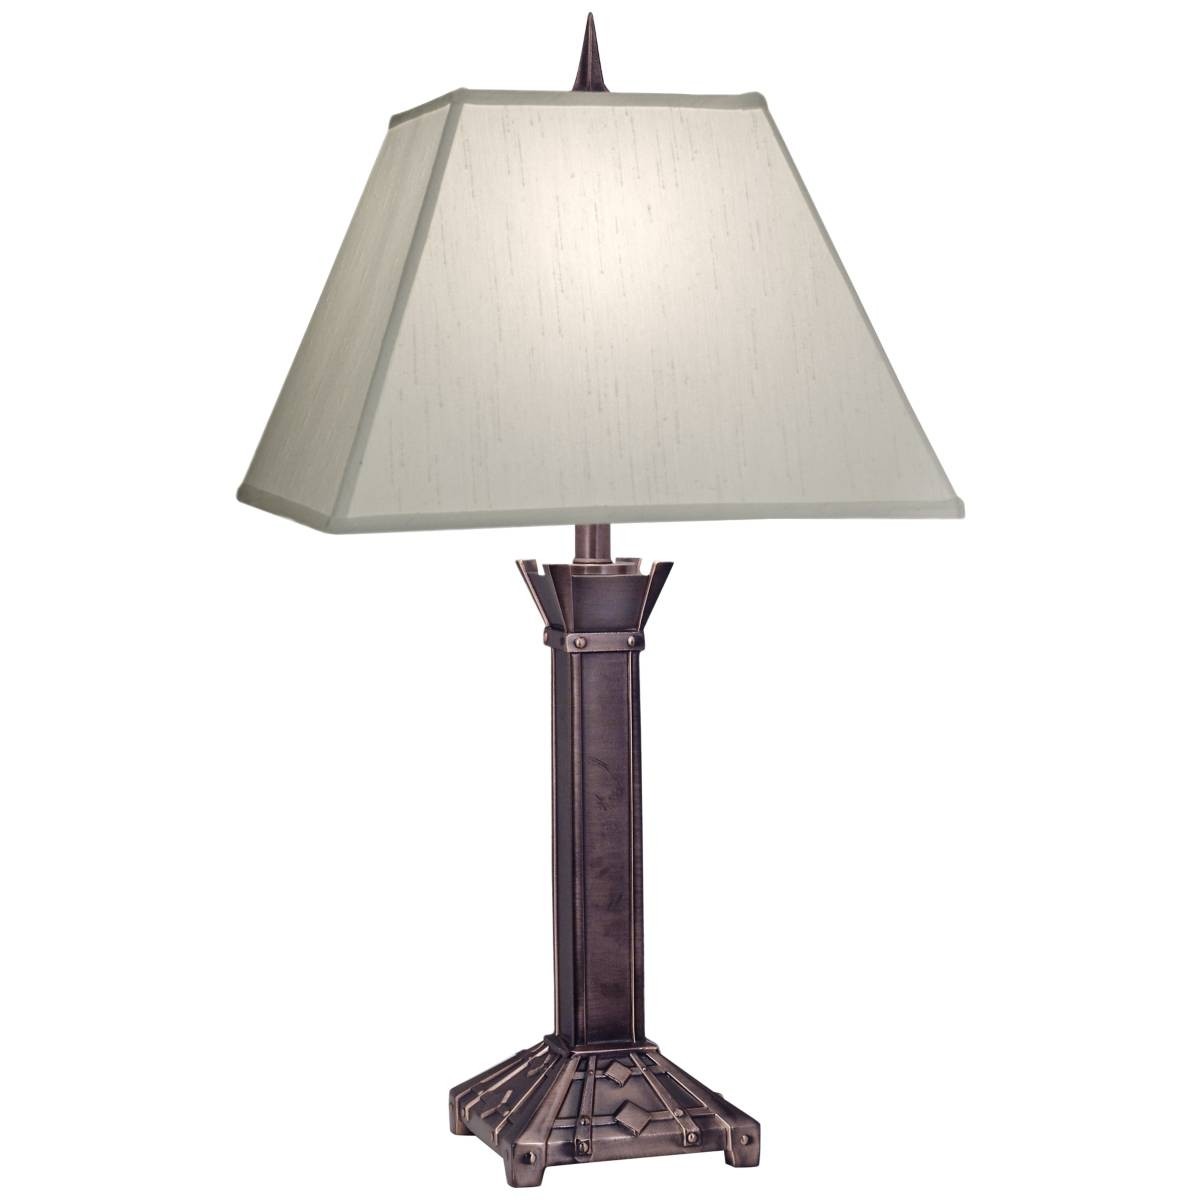 Stiffel TL-N8633-AC One Light Table Lamp, Antique Copper Finish with Global White Shade